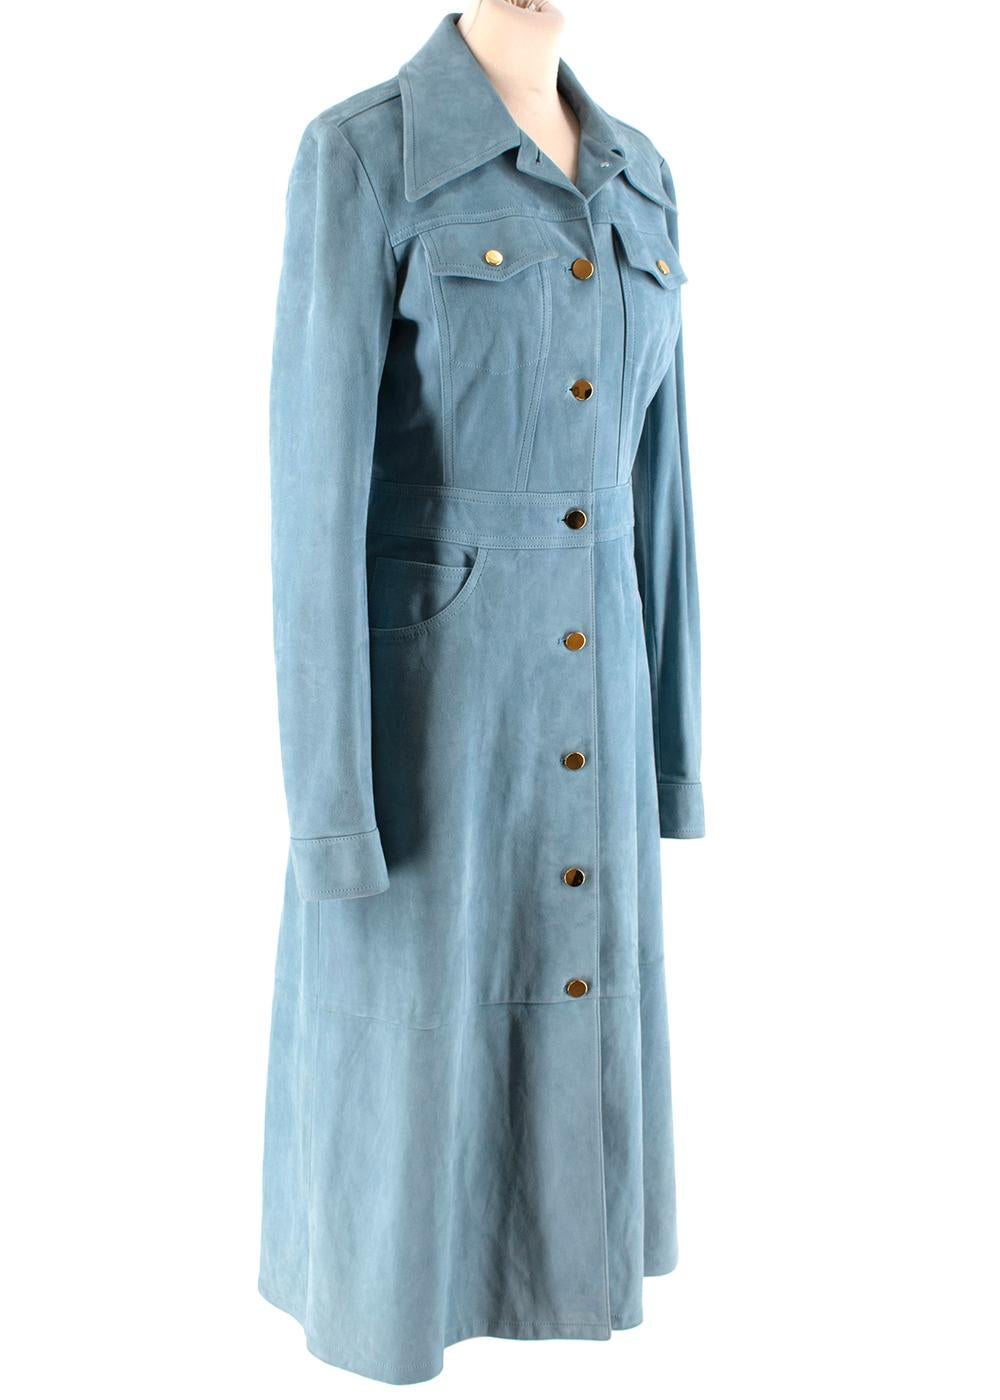 Michael Kors Collection Blue Suede Trench Coat Dress

- Made of super soft lambskin suede 
- Denim jacket inspired details 
- Gorgeous light blue hue 
- Pockets to the front 
- Gold tone hardware 
- Buttoned cuffs 
- Timeless elegant design